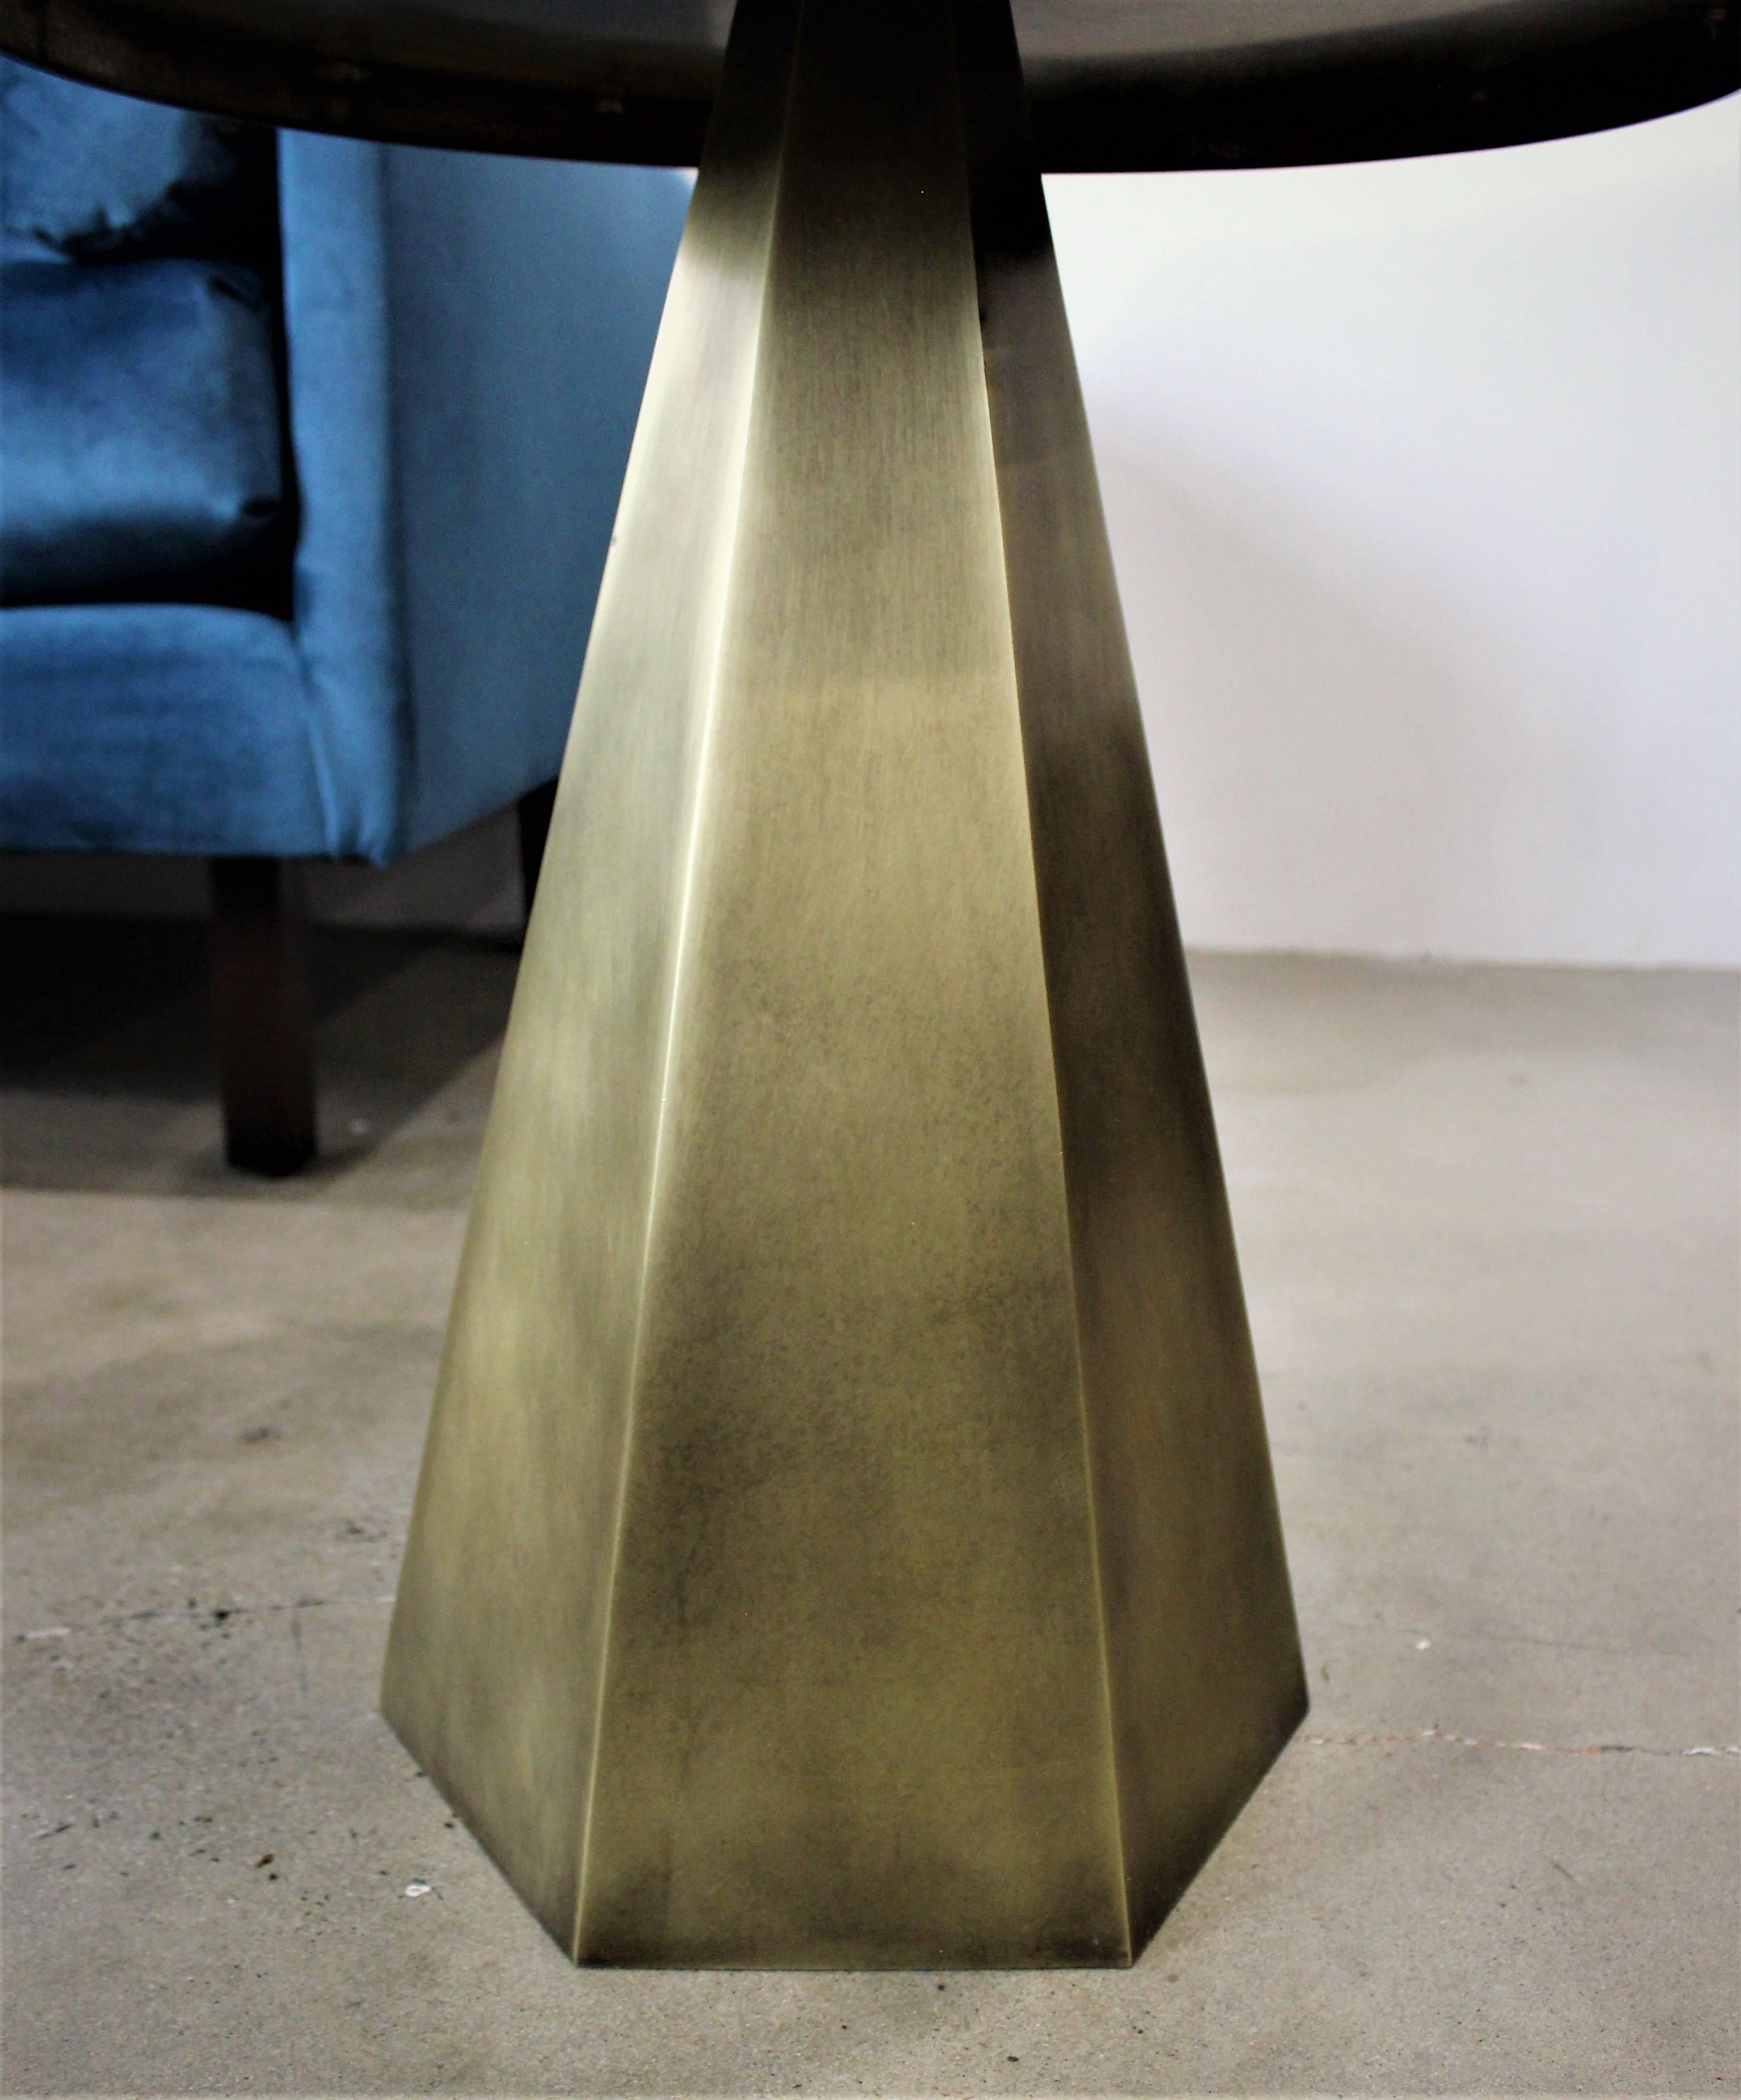 Chrome Sculptural Hand-Forged Hexagonal Side Table in Solid Patinated Brass